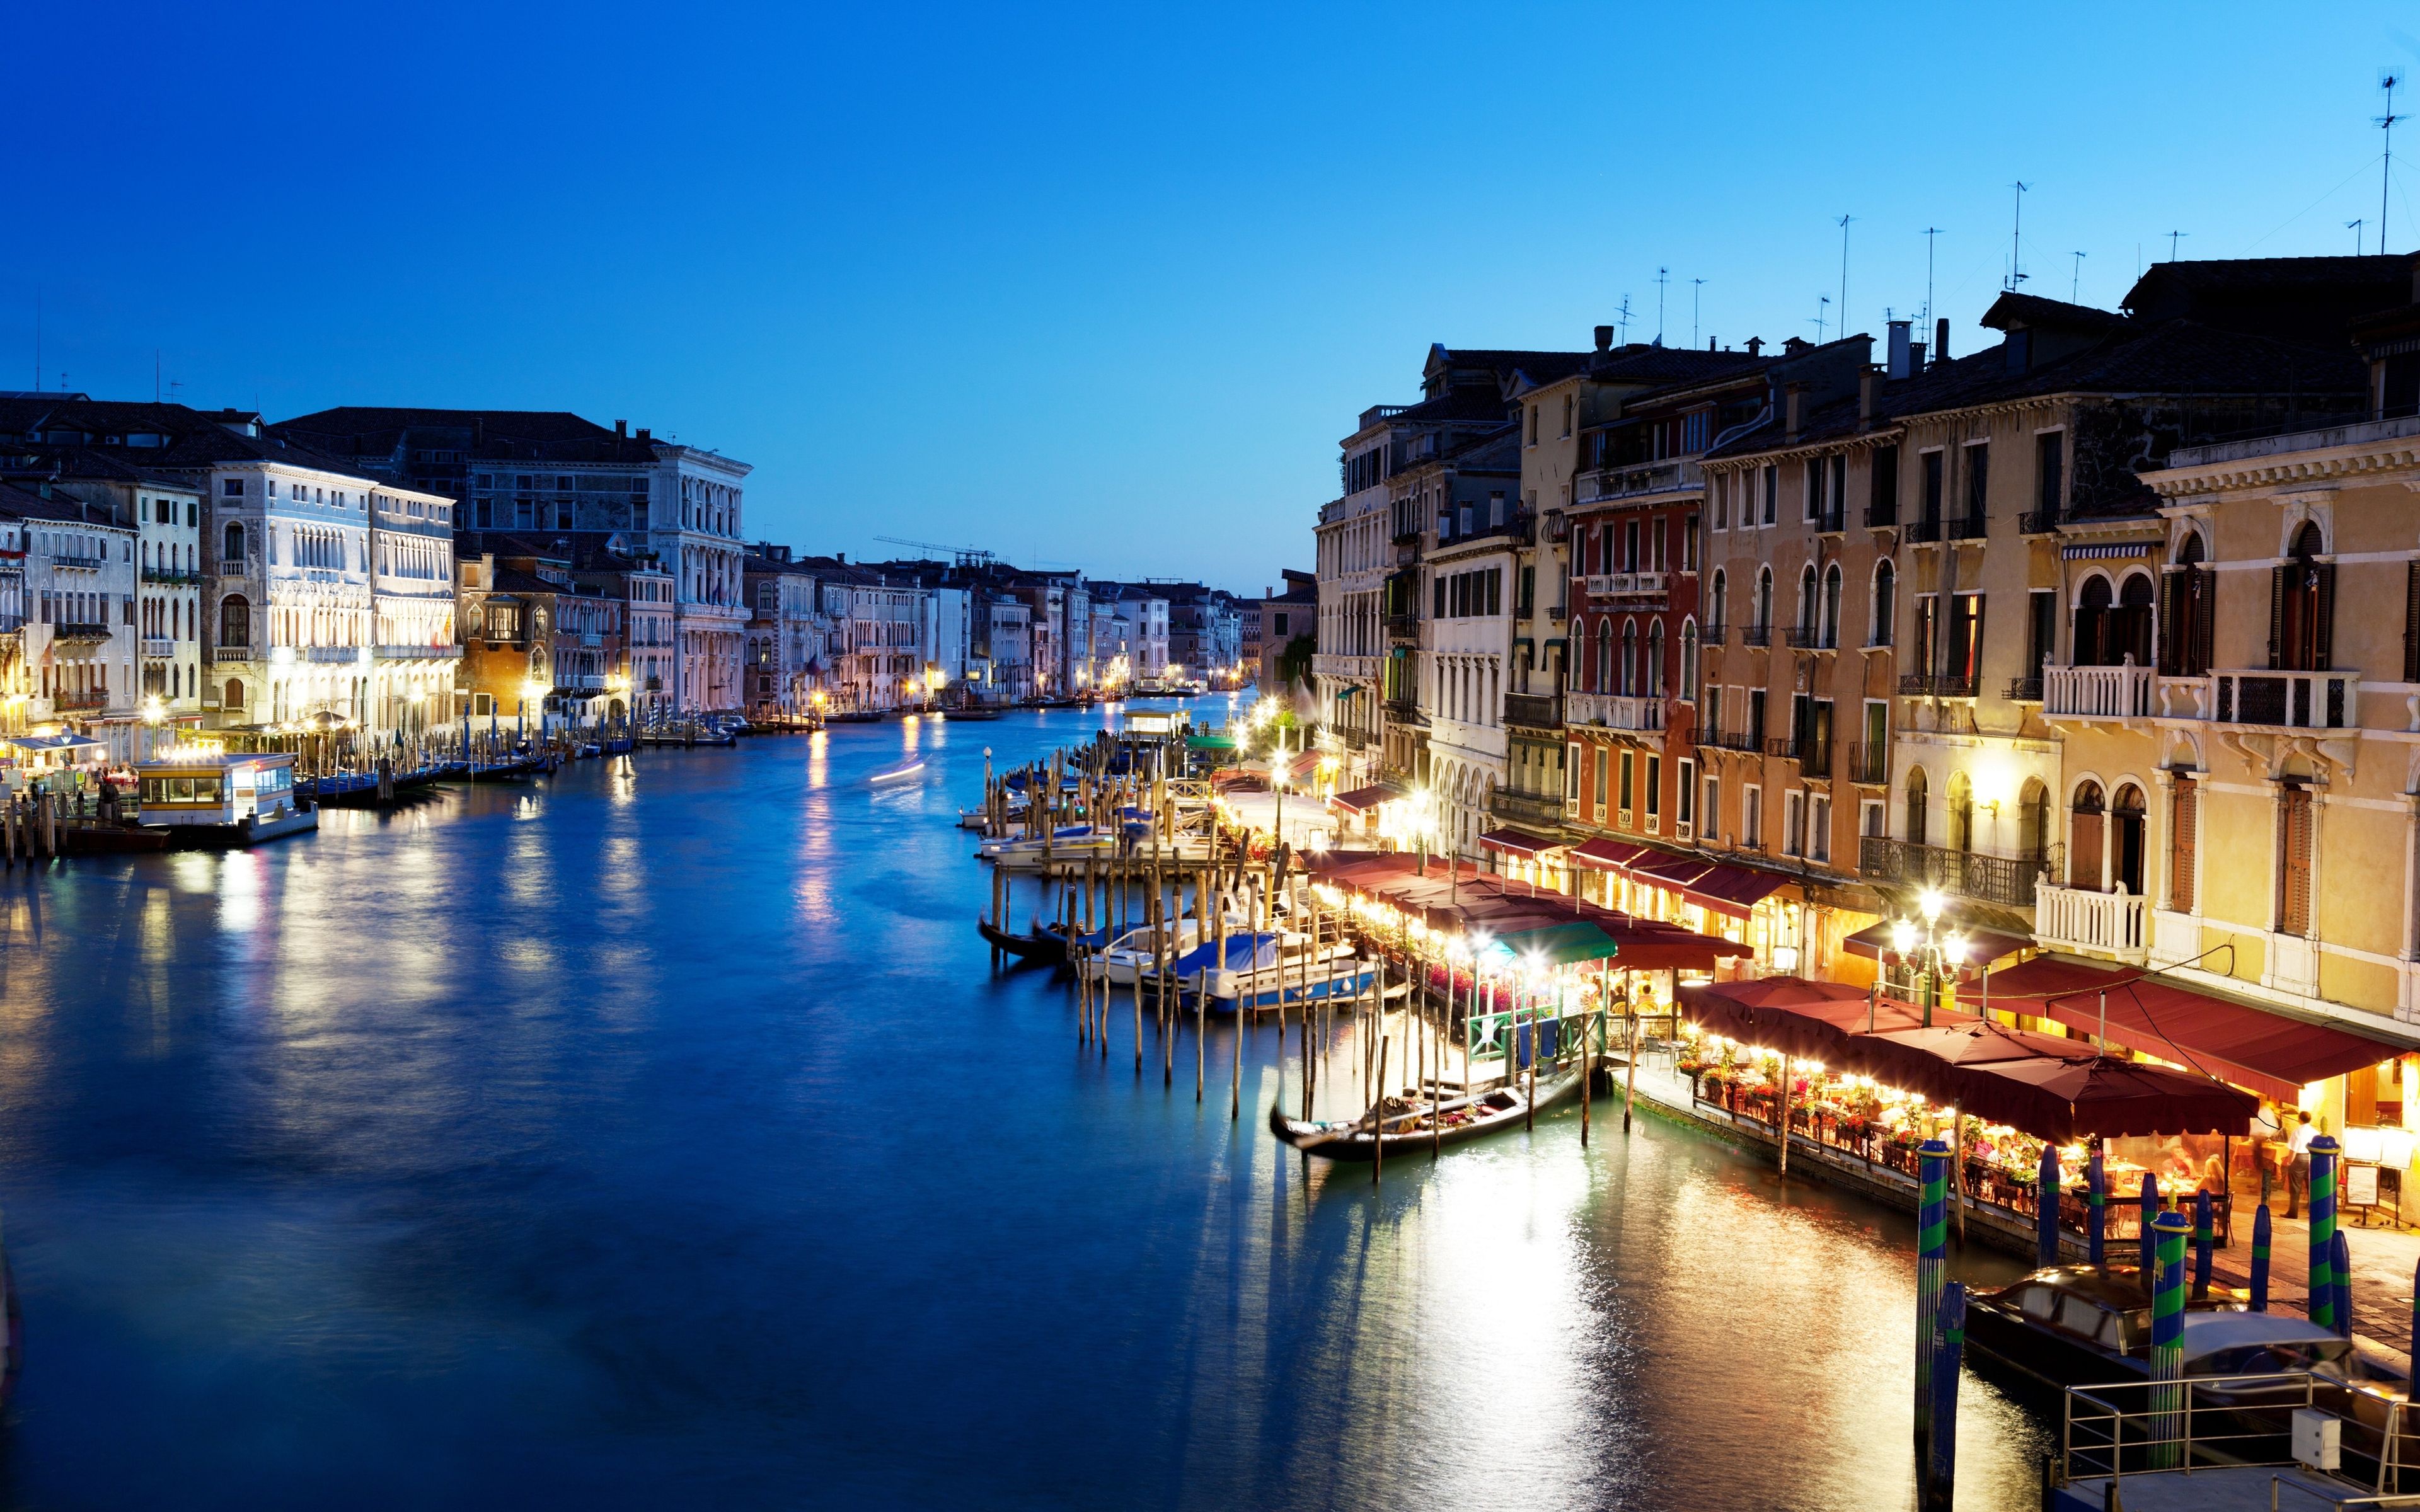 Grand Canal Venice for 3840 x 2400 4K Retina Display resolution